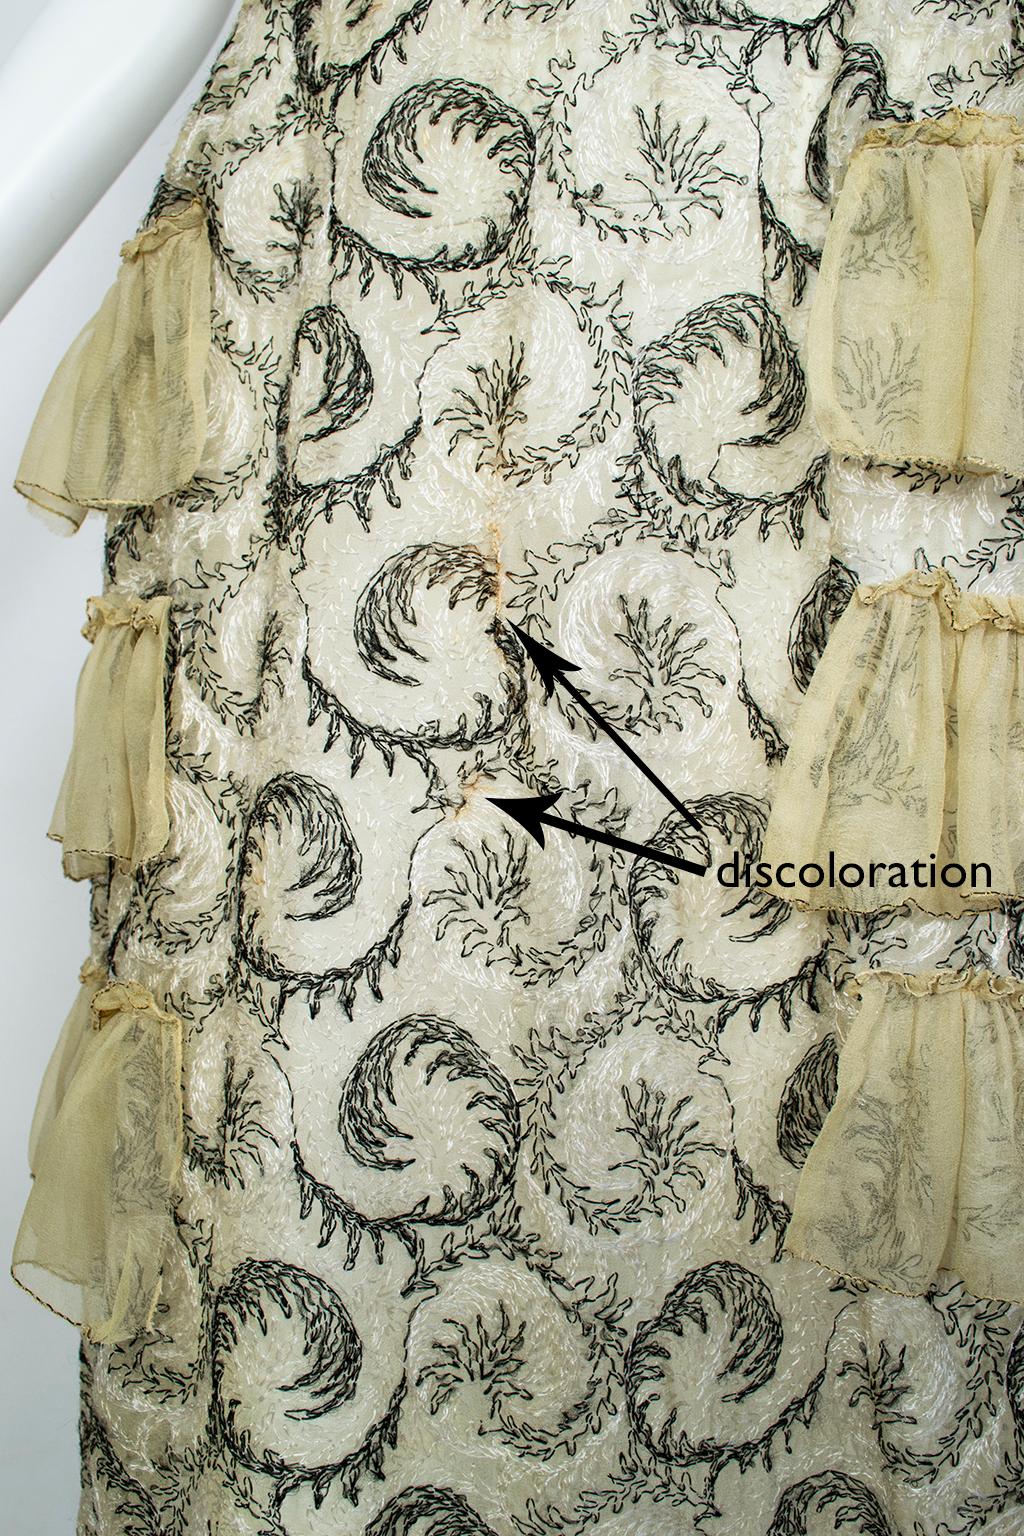 Chartreuse Edwardian Chiffon Robe de Style with Scrolling Embroidery - XS, 1910s For Sale 6